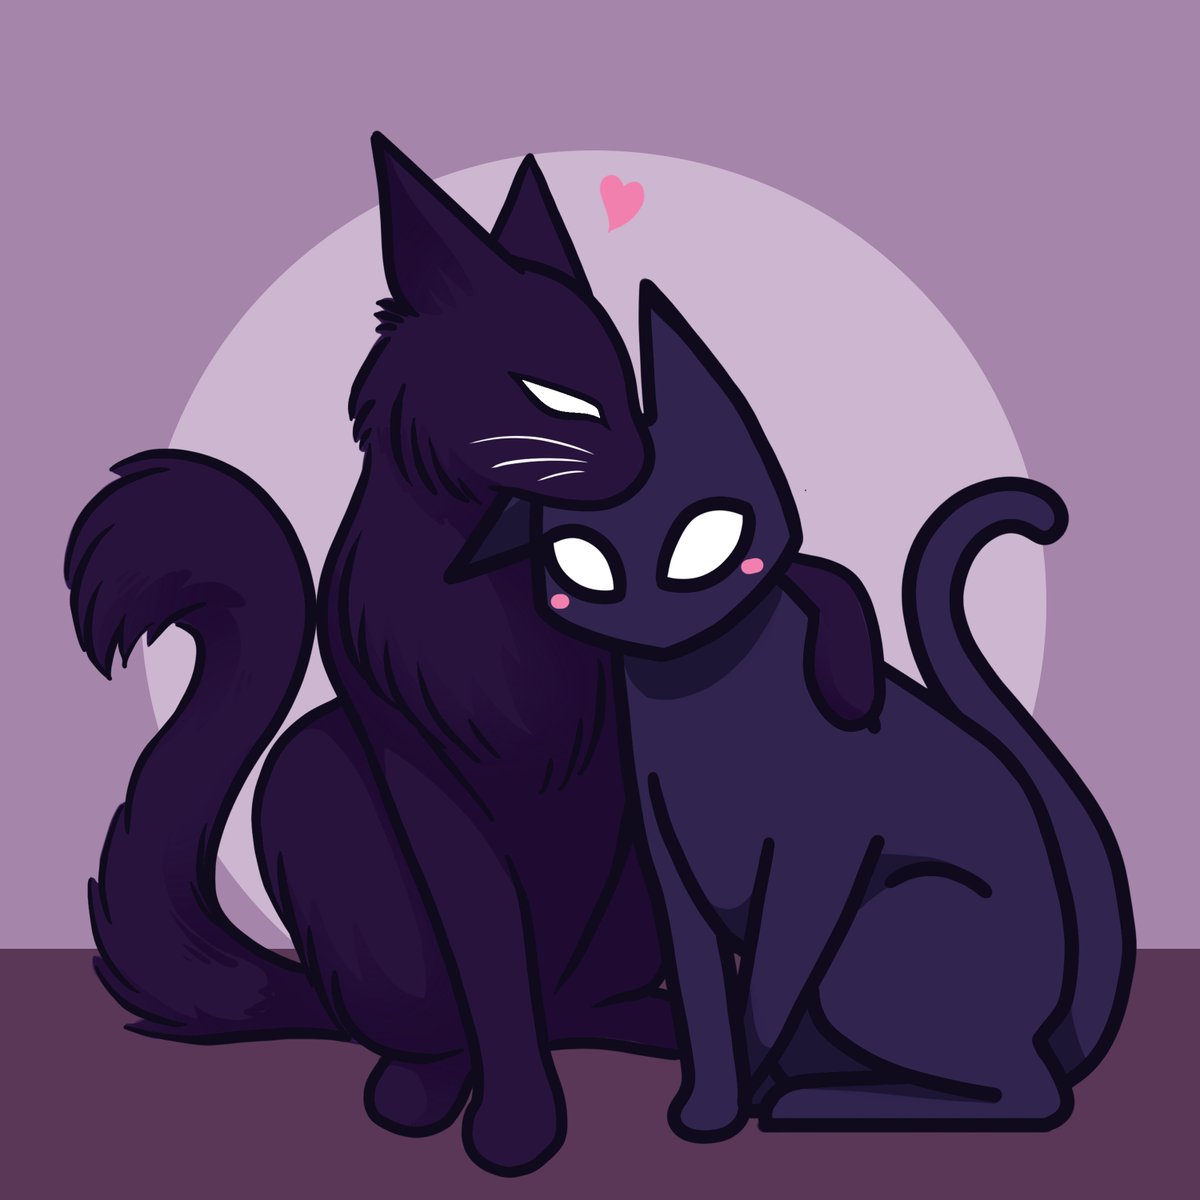 Moka Rafe The Demon Kitty & The Shadow Prince! 
This was collab between me and @kcpawz  after they painted their Shadow Prince and I shipped it with my own purple cat with white eyes
#catart #catartwork #cartooncat #purplecat #fantasycat #fantasycats #demoncat #couplegoals